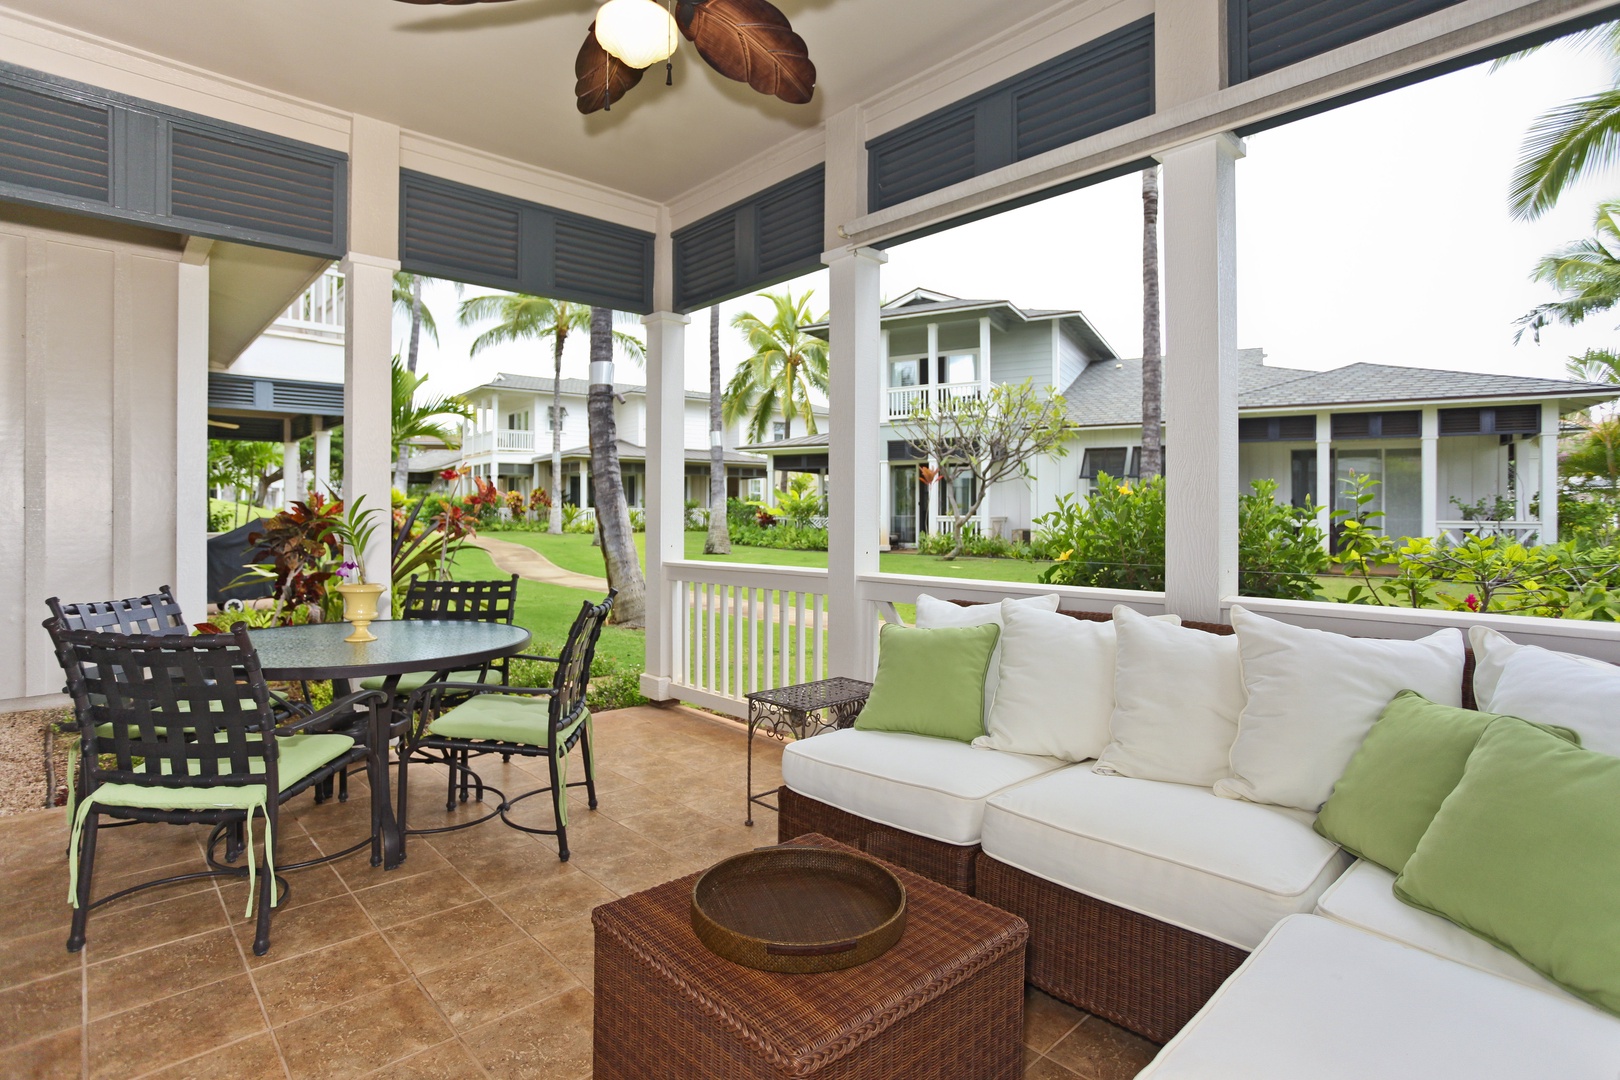 Kapolei Vacation Rentals, Coconut Plantation 1108-2 - The elegant lanai with luxurious furnishings surrounded by swaying palm trees.